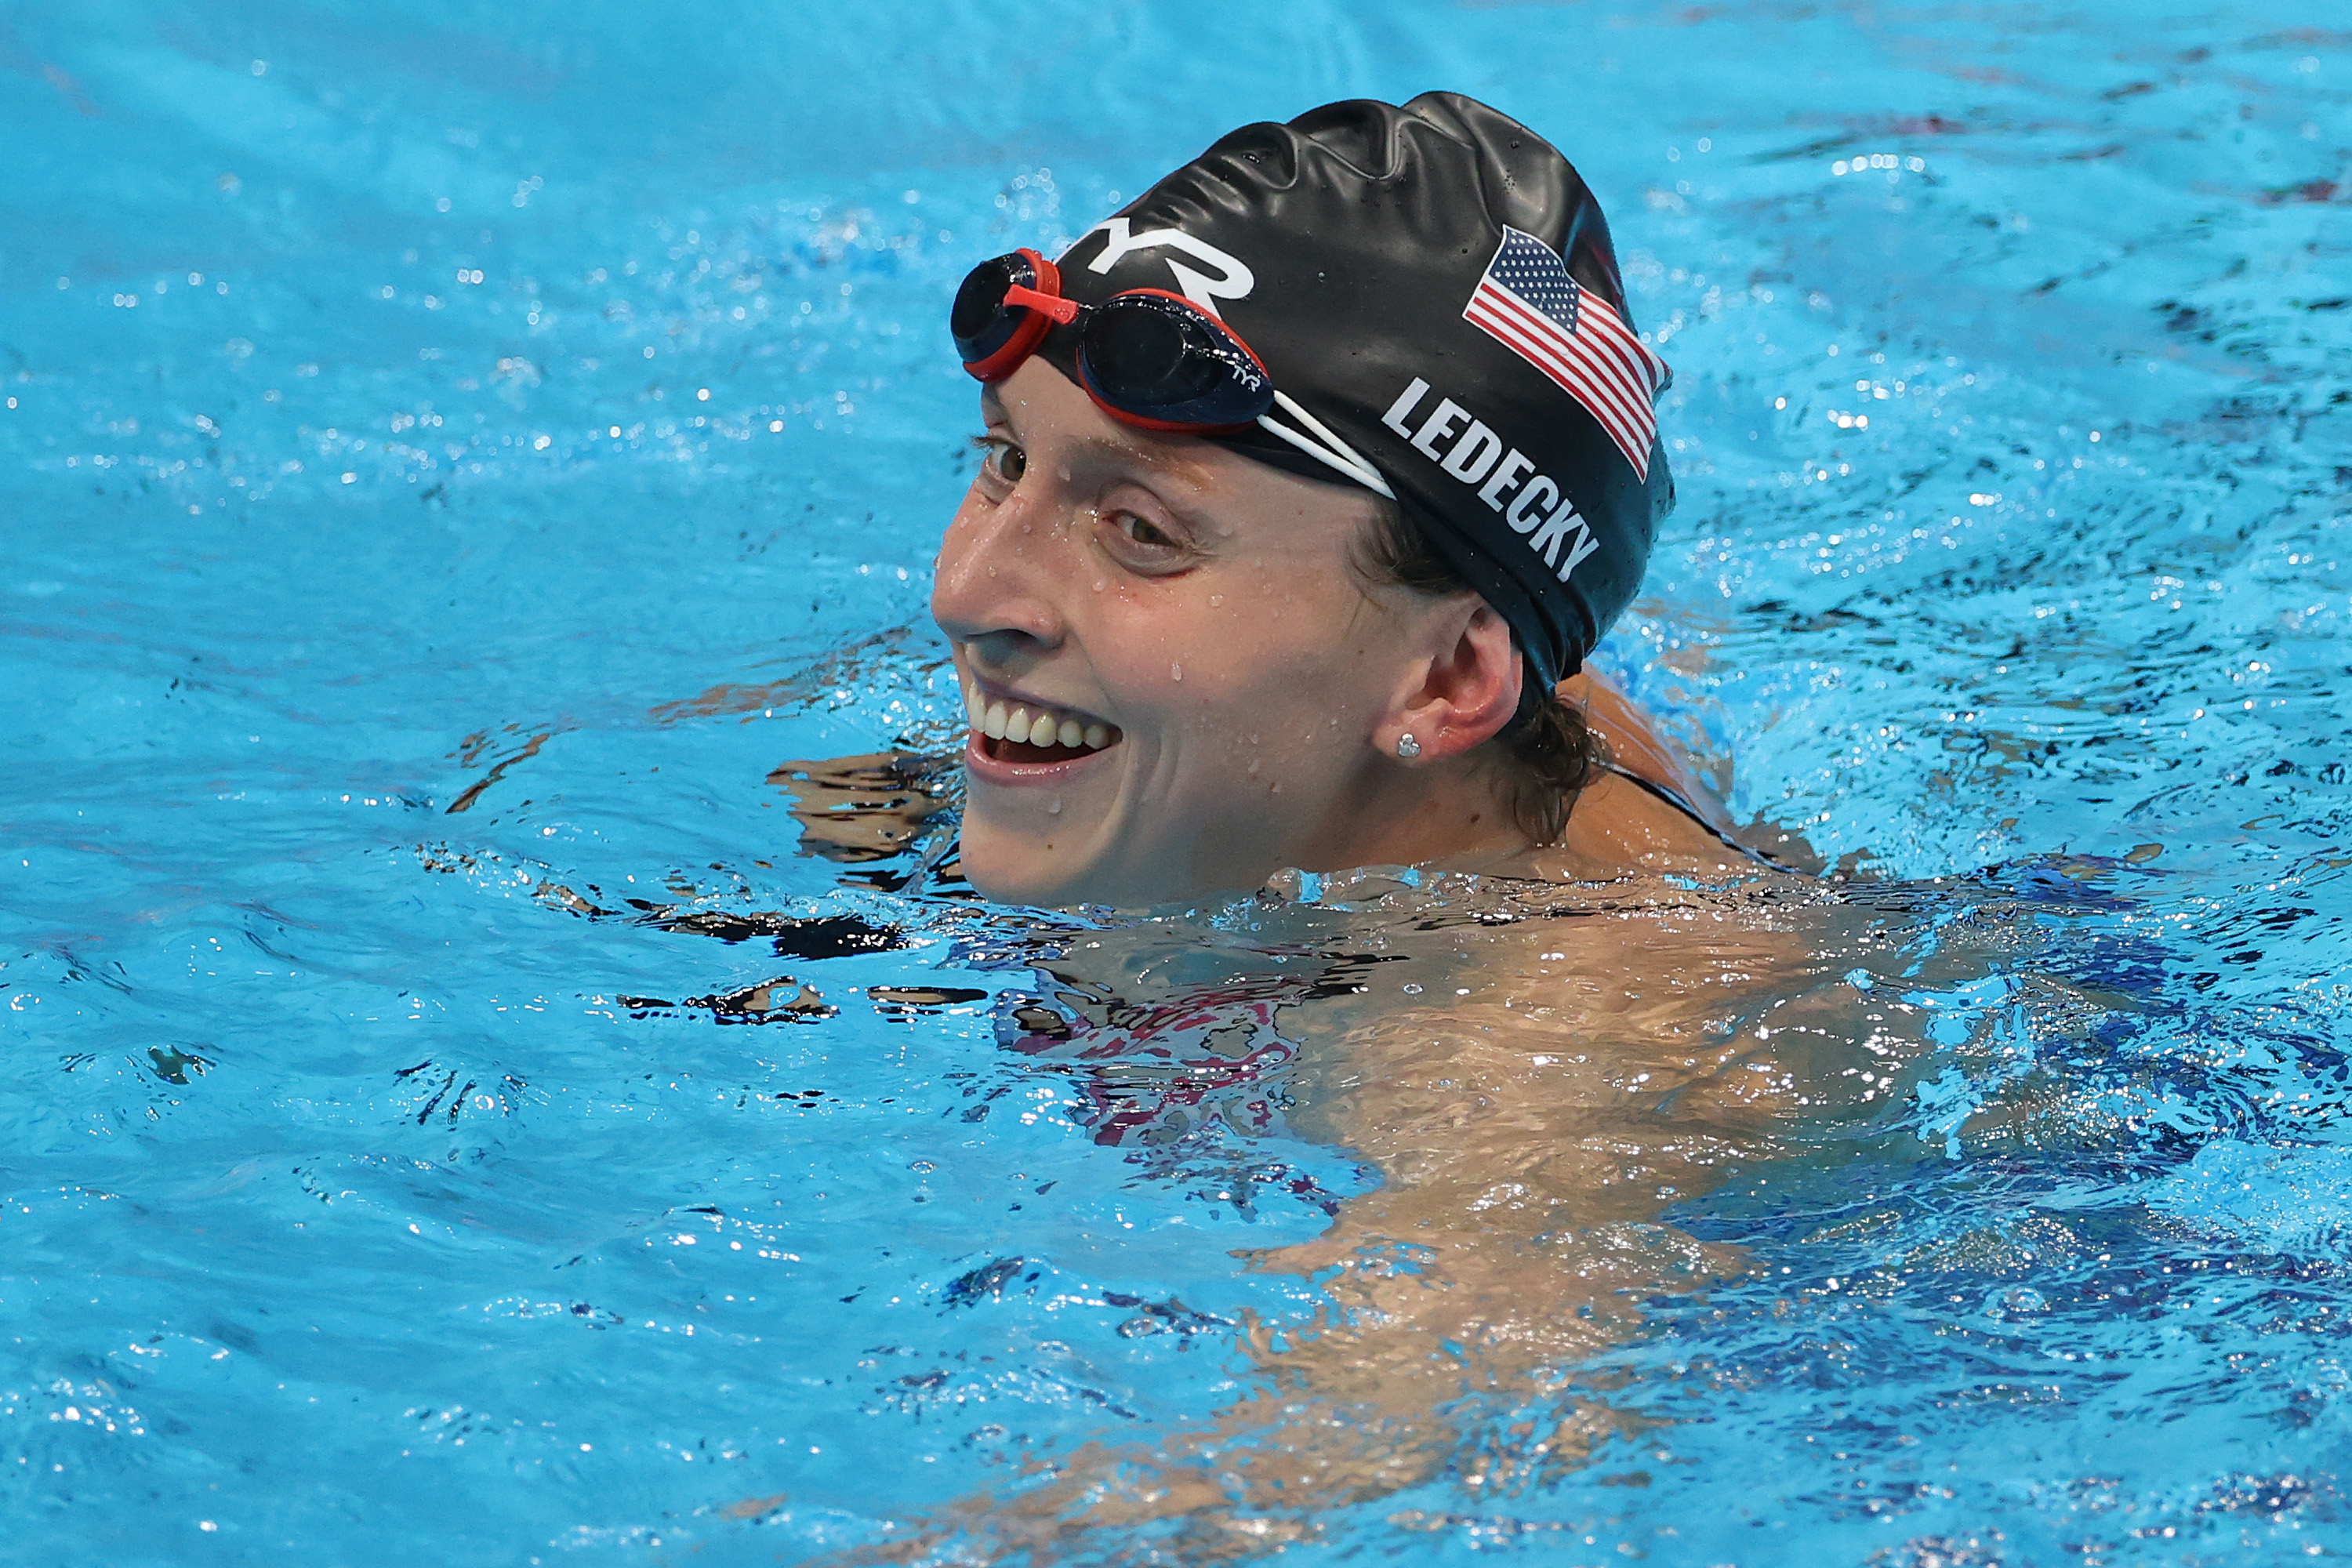 Ledecky Wins 800m Freestyle, Becomes 1st Female Swimmer With 6 Olympic Golds